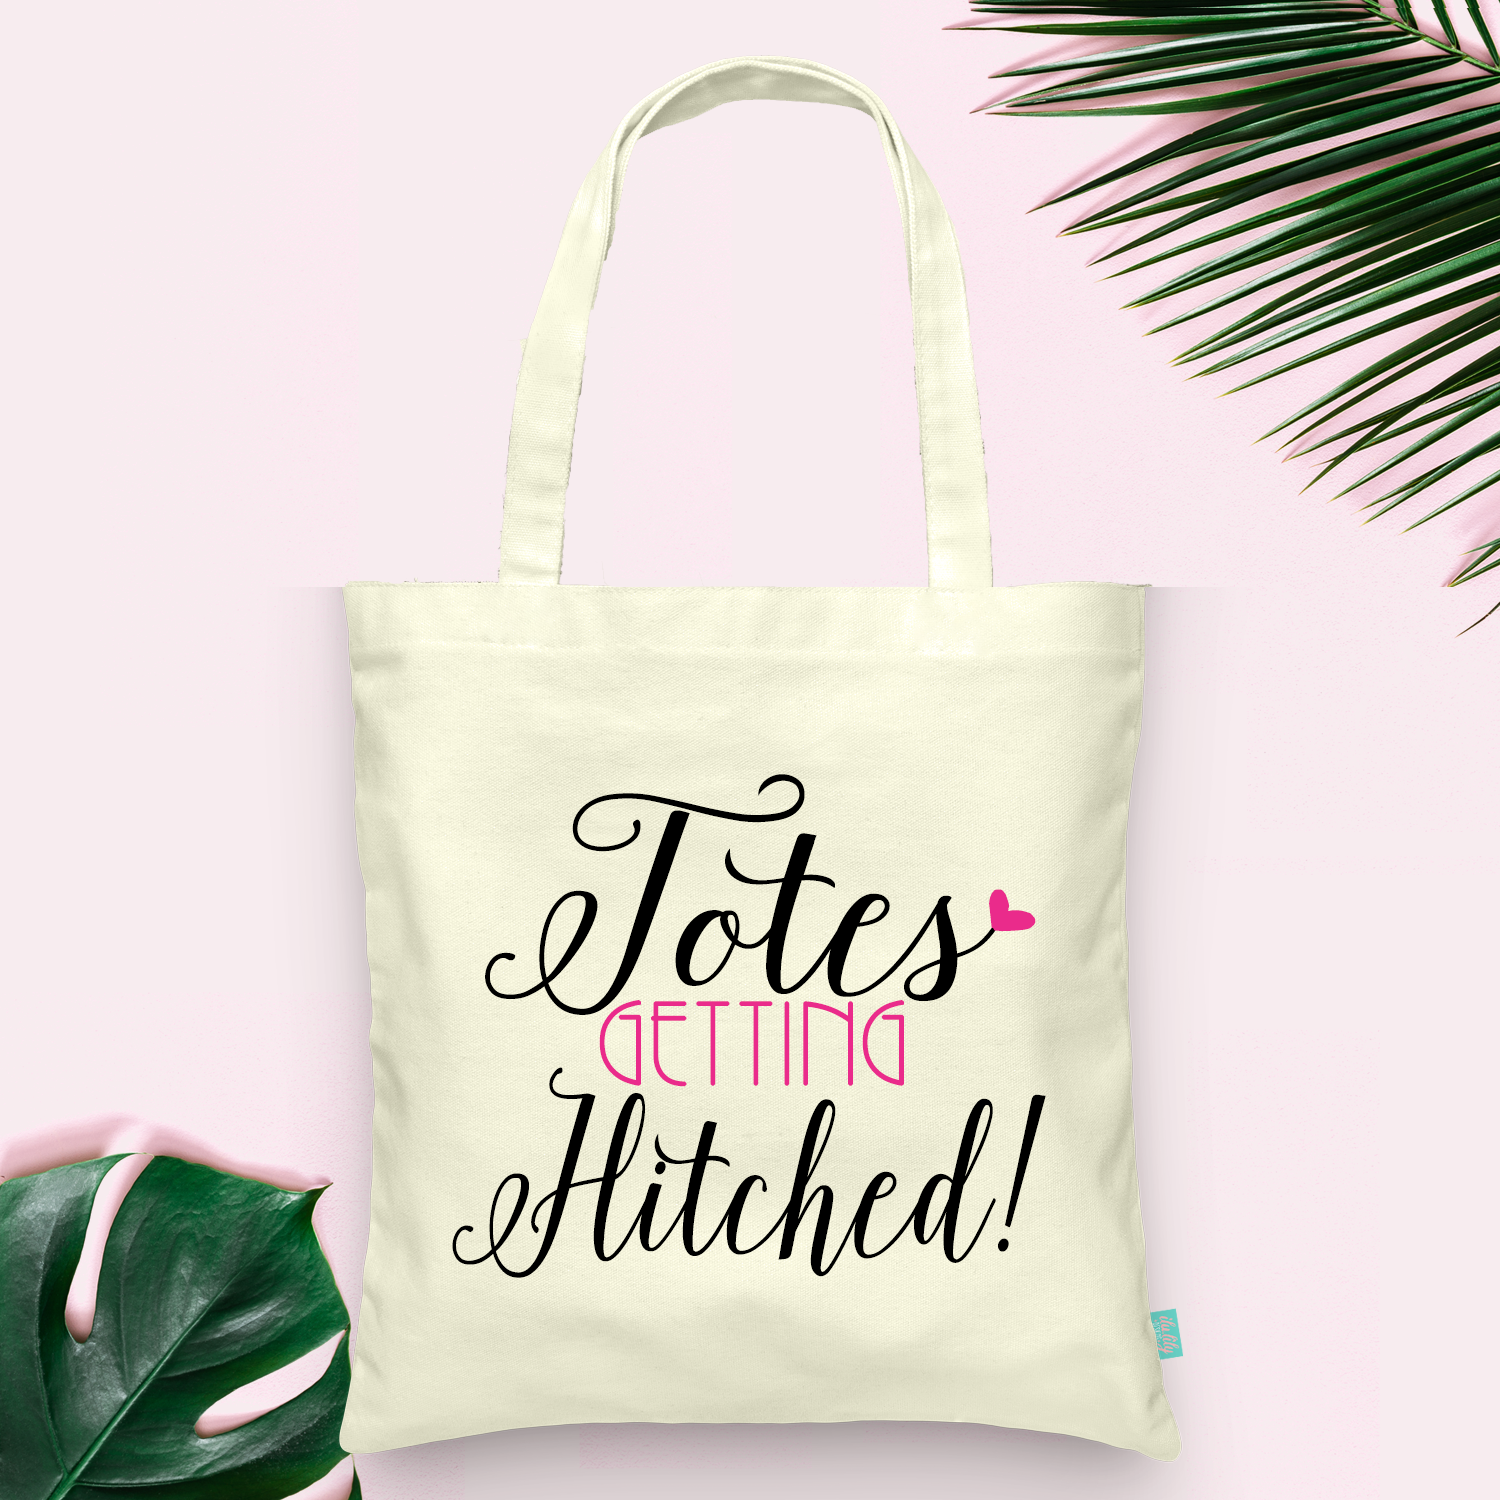 Wedding Tote Bag | Gift for Bride to Be | Totes Getting Hitched